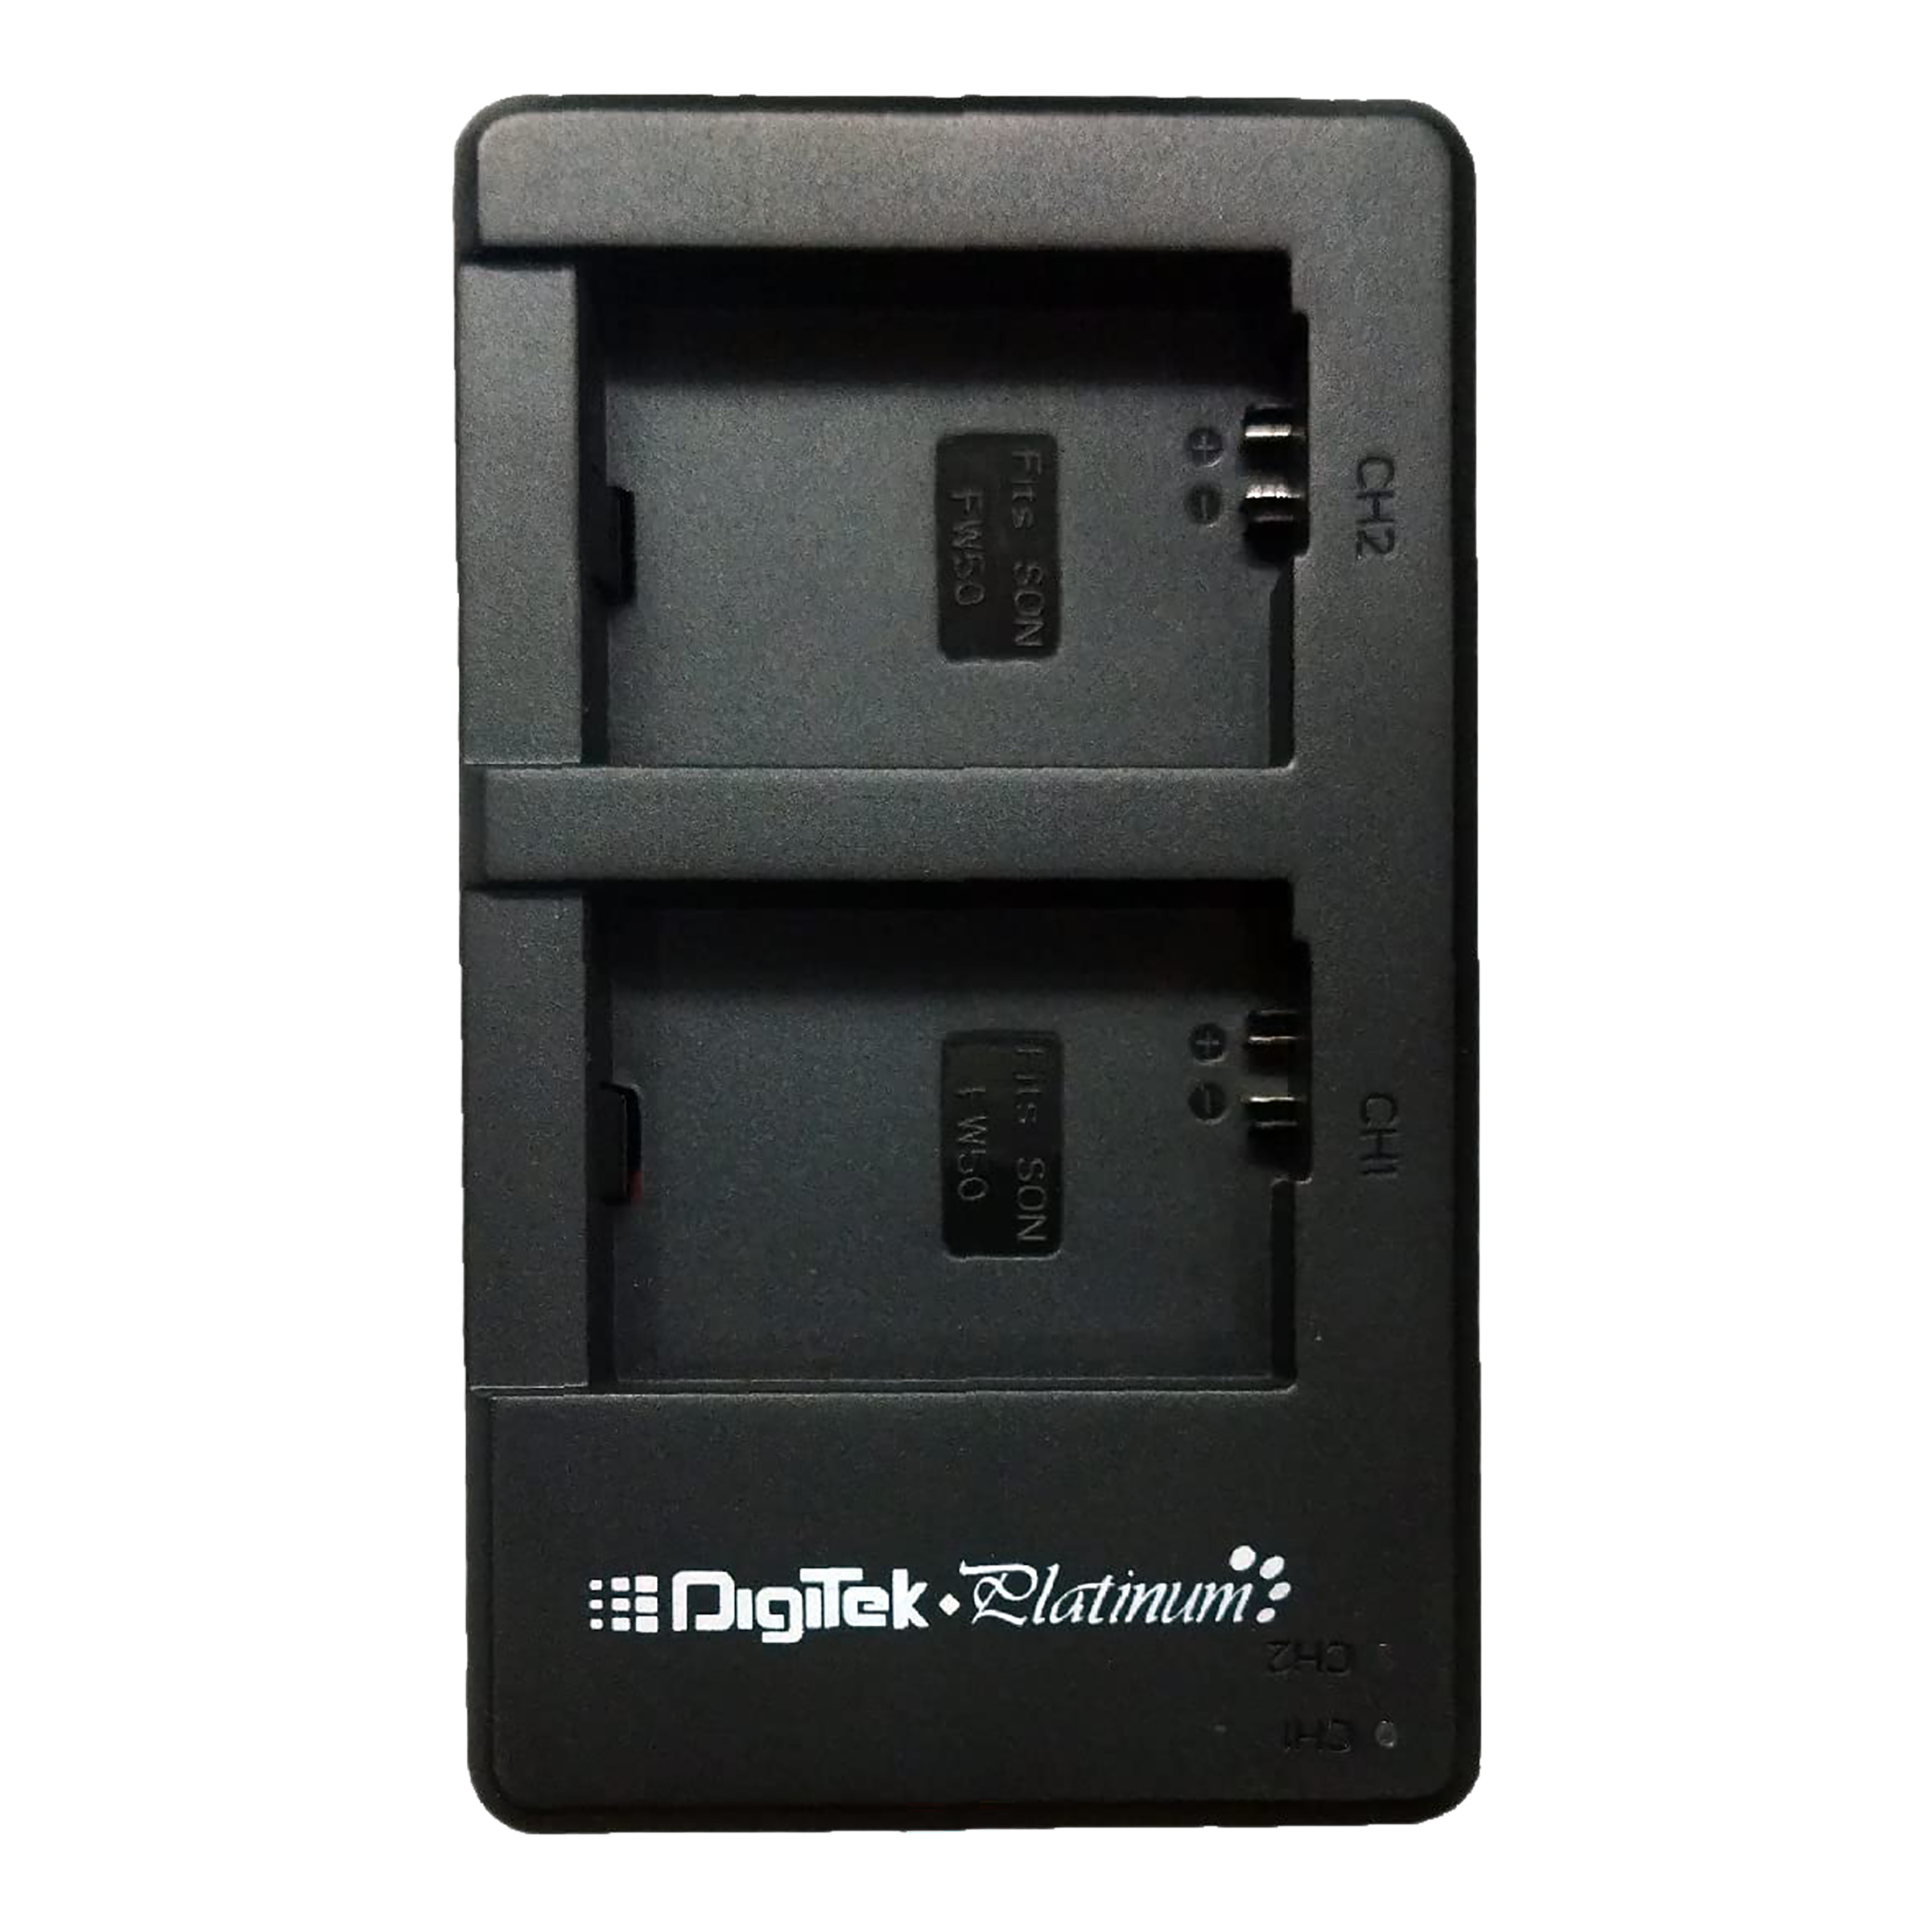 DigiTek Platinum DPUC 010 Fast Camera Battery Charger Combo for FW50 (2-Ports, Over Voltage Protection)